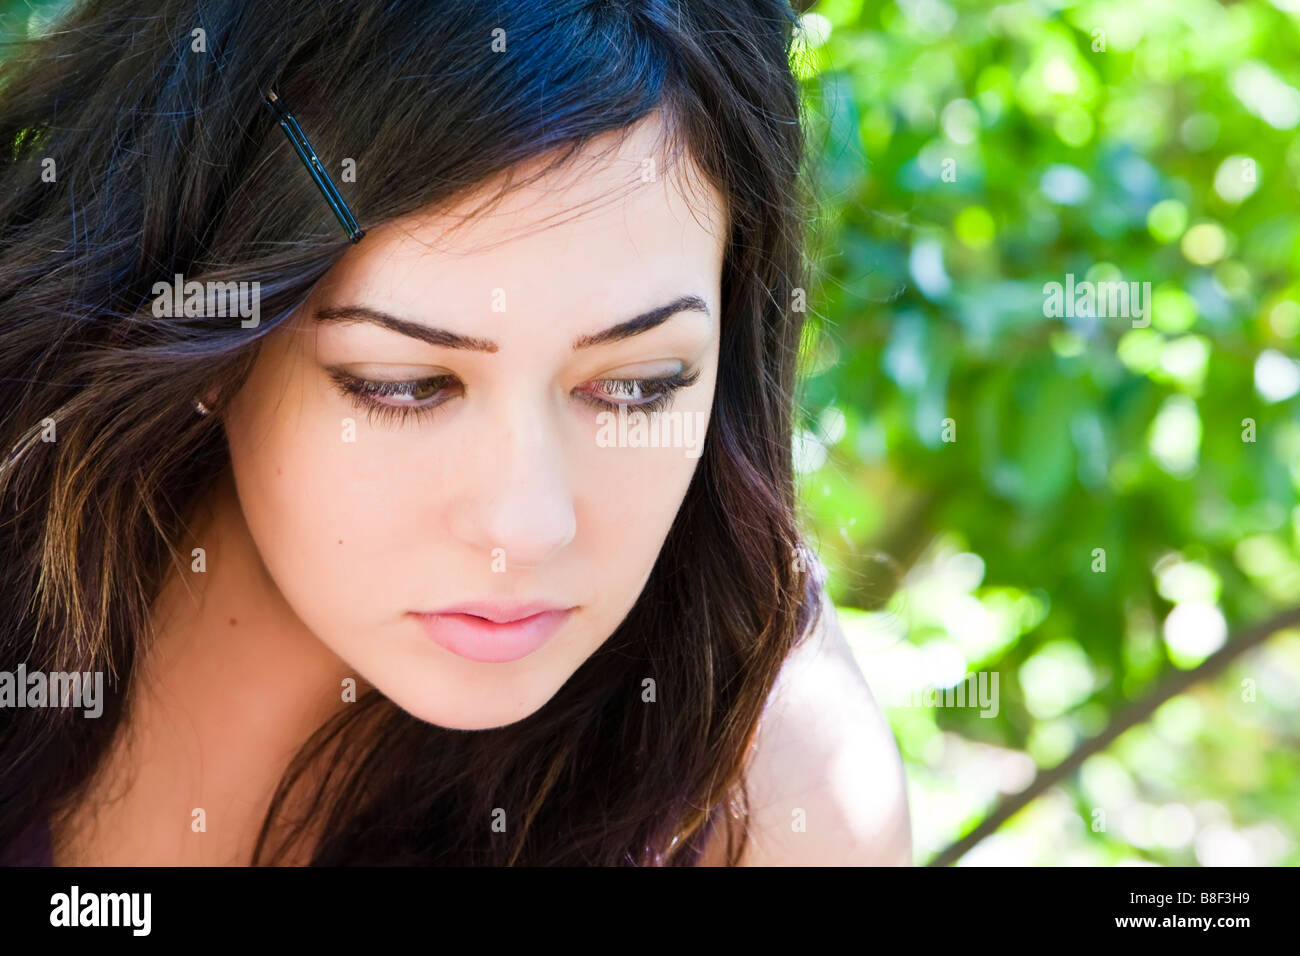 Young woman portrait staring to the right side Stock Photo